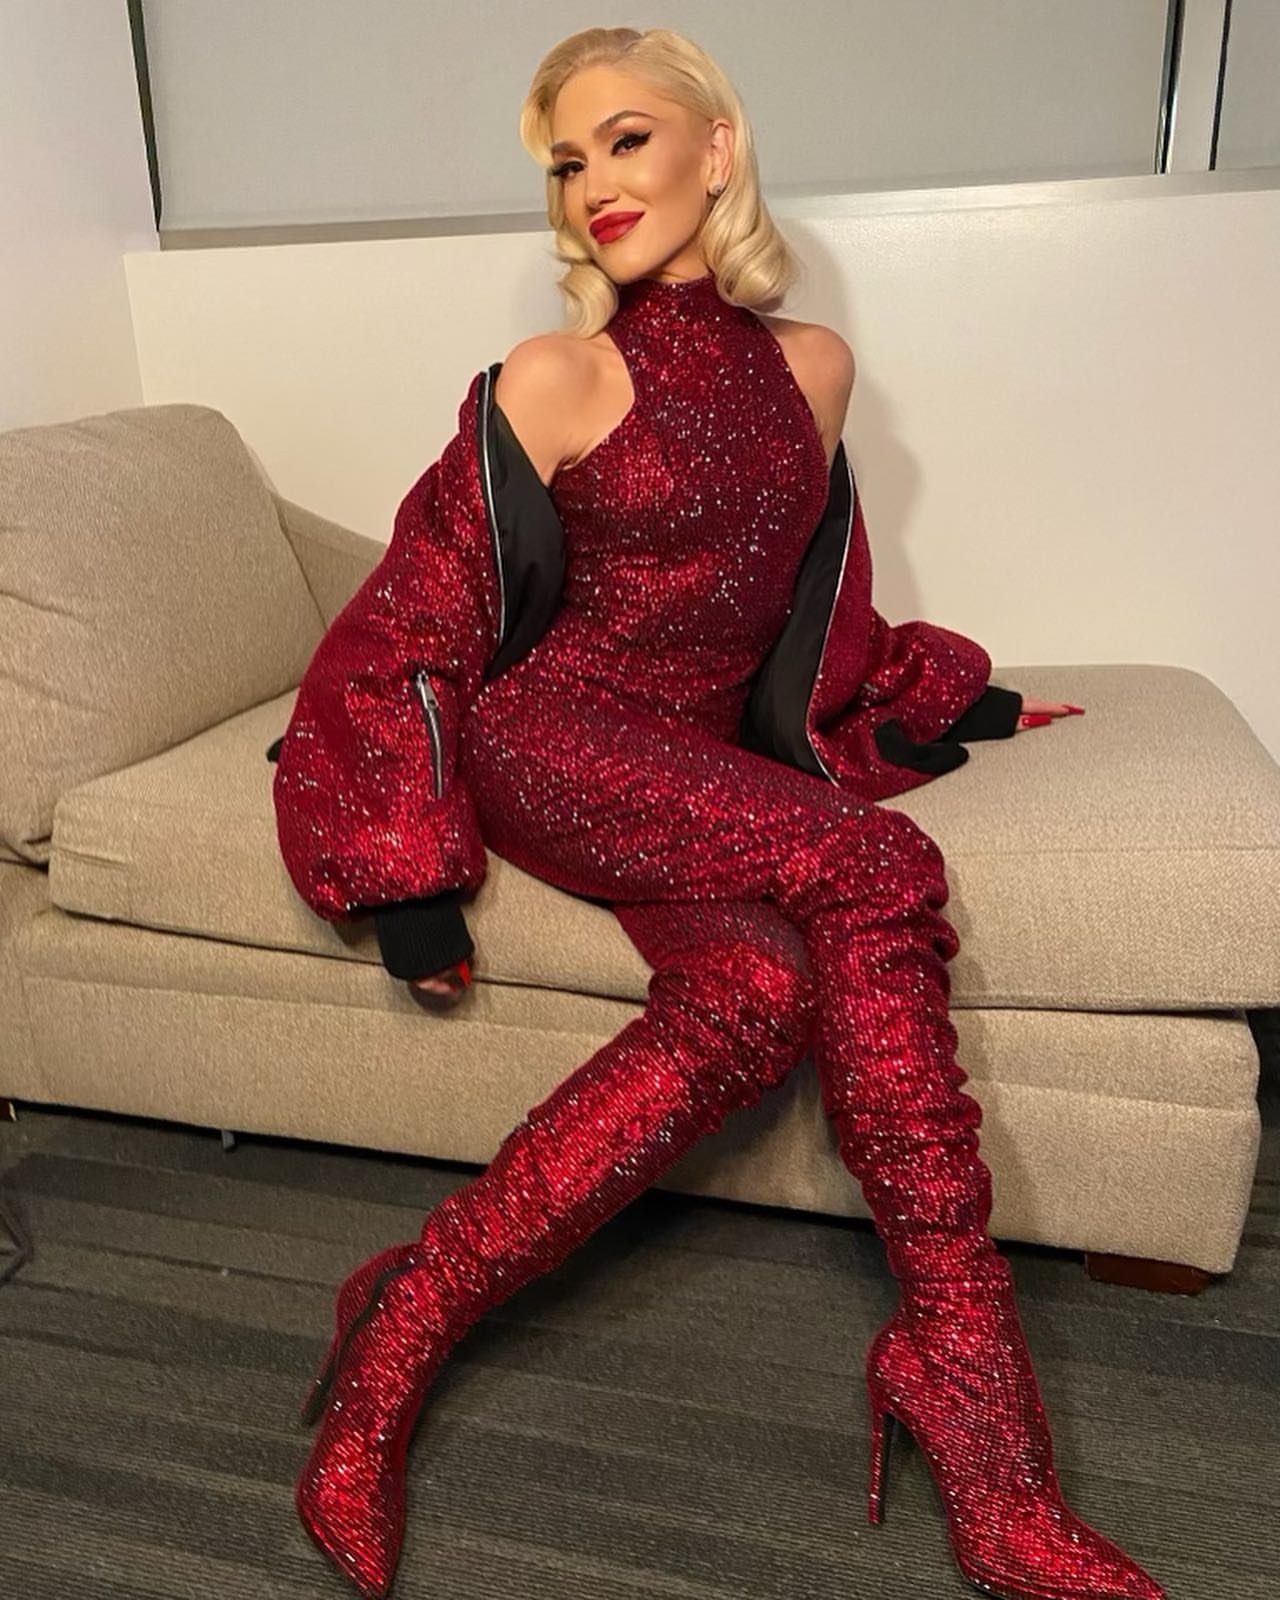 Photos n°3 : Gwen Stefani is Here for Christmas!